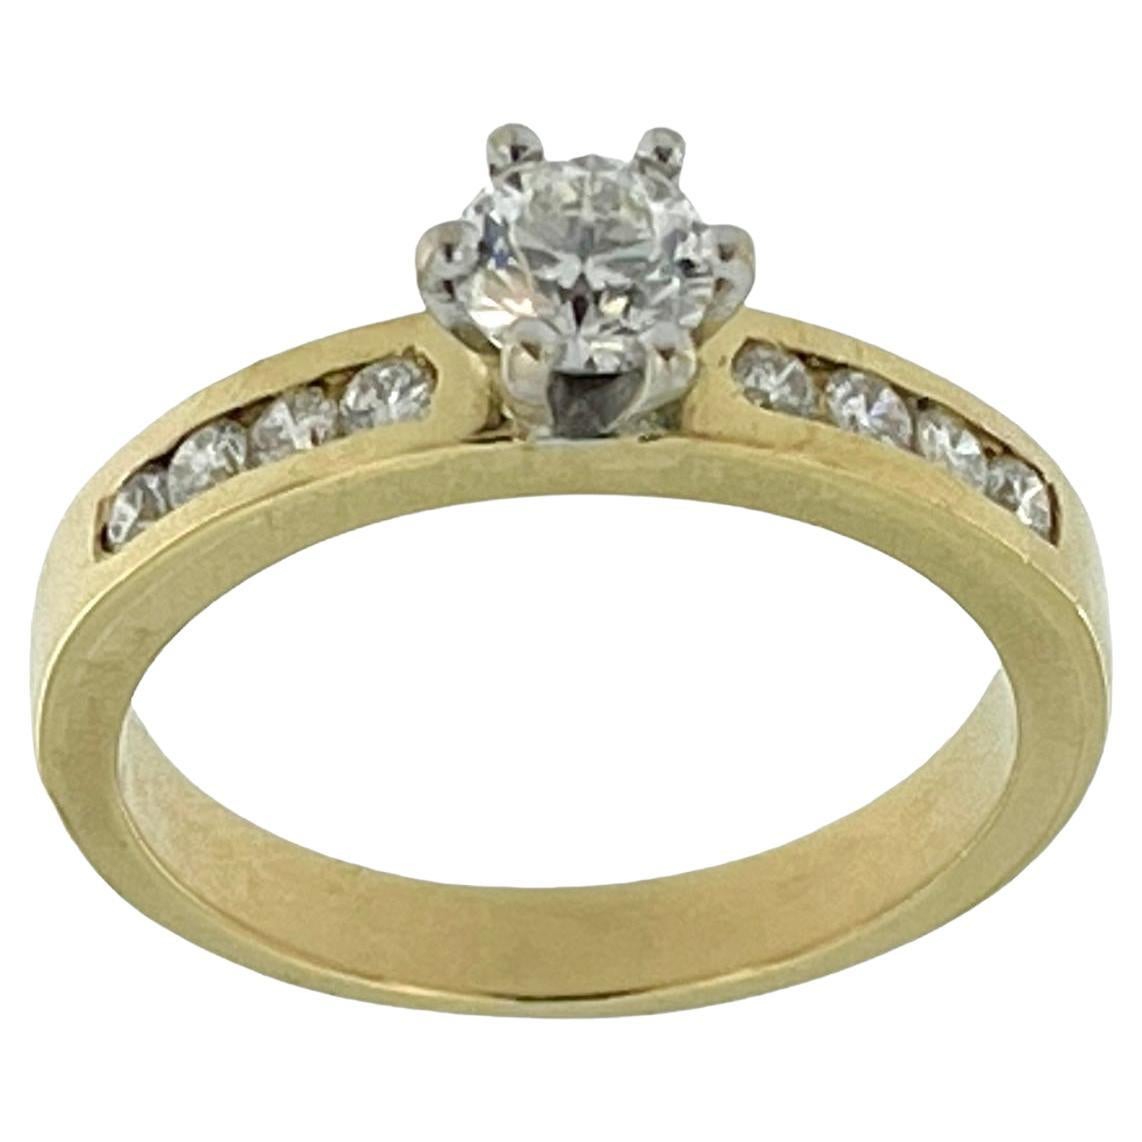 HRD Certified Yellow and White Gold Engagement Ring with Diamonds